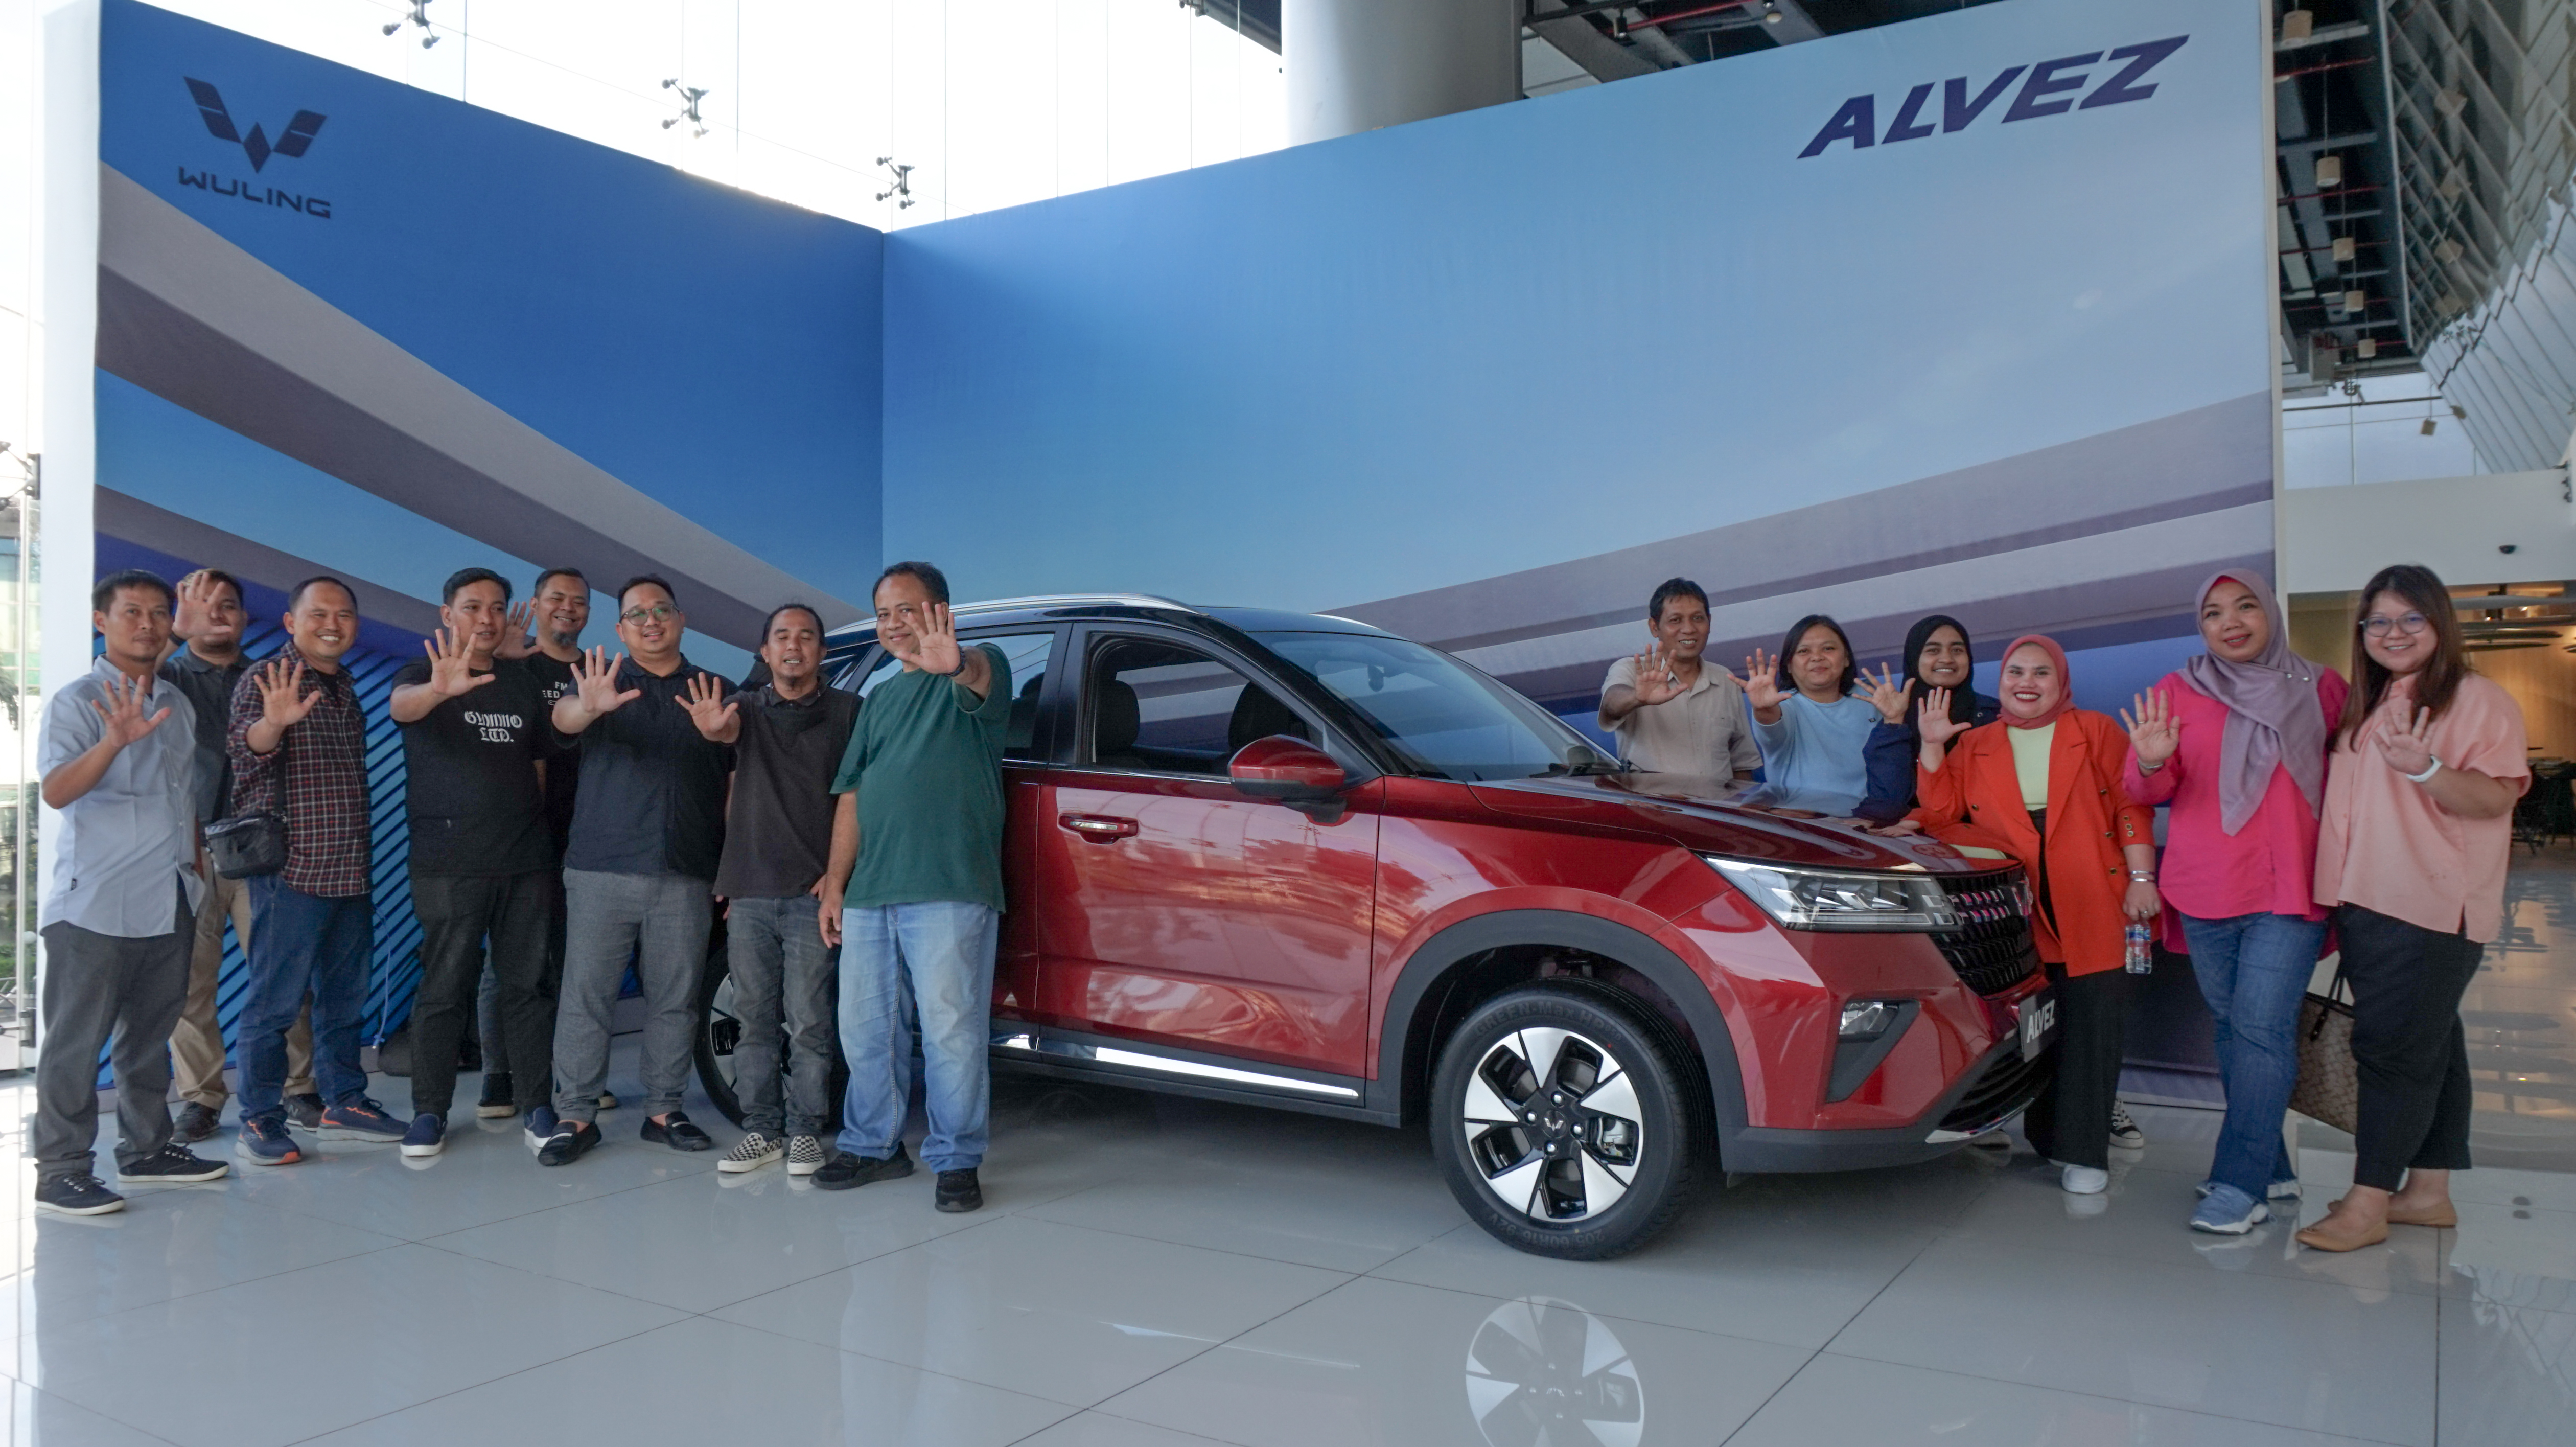 Image Wuling Invites Regional Media to Catch A Sight of Its Latest Compact SUV, Alvez